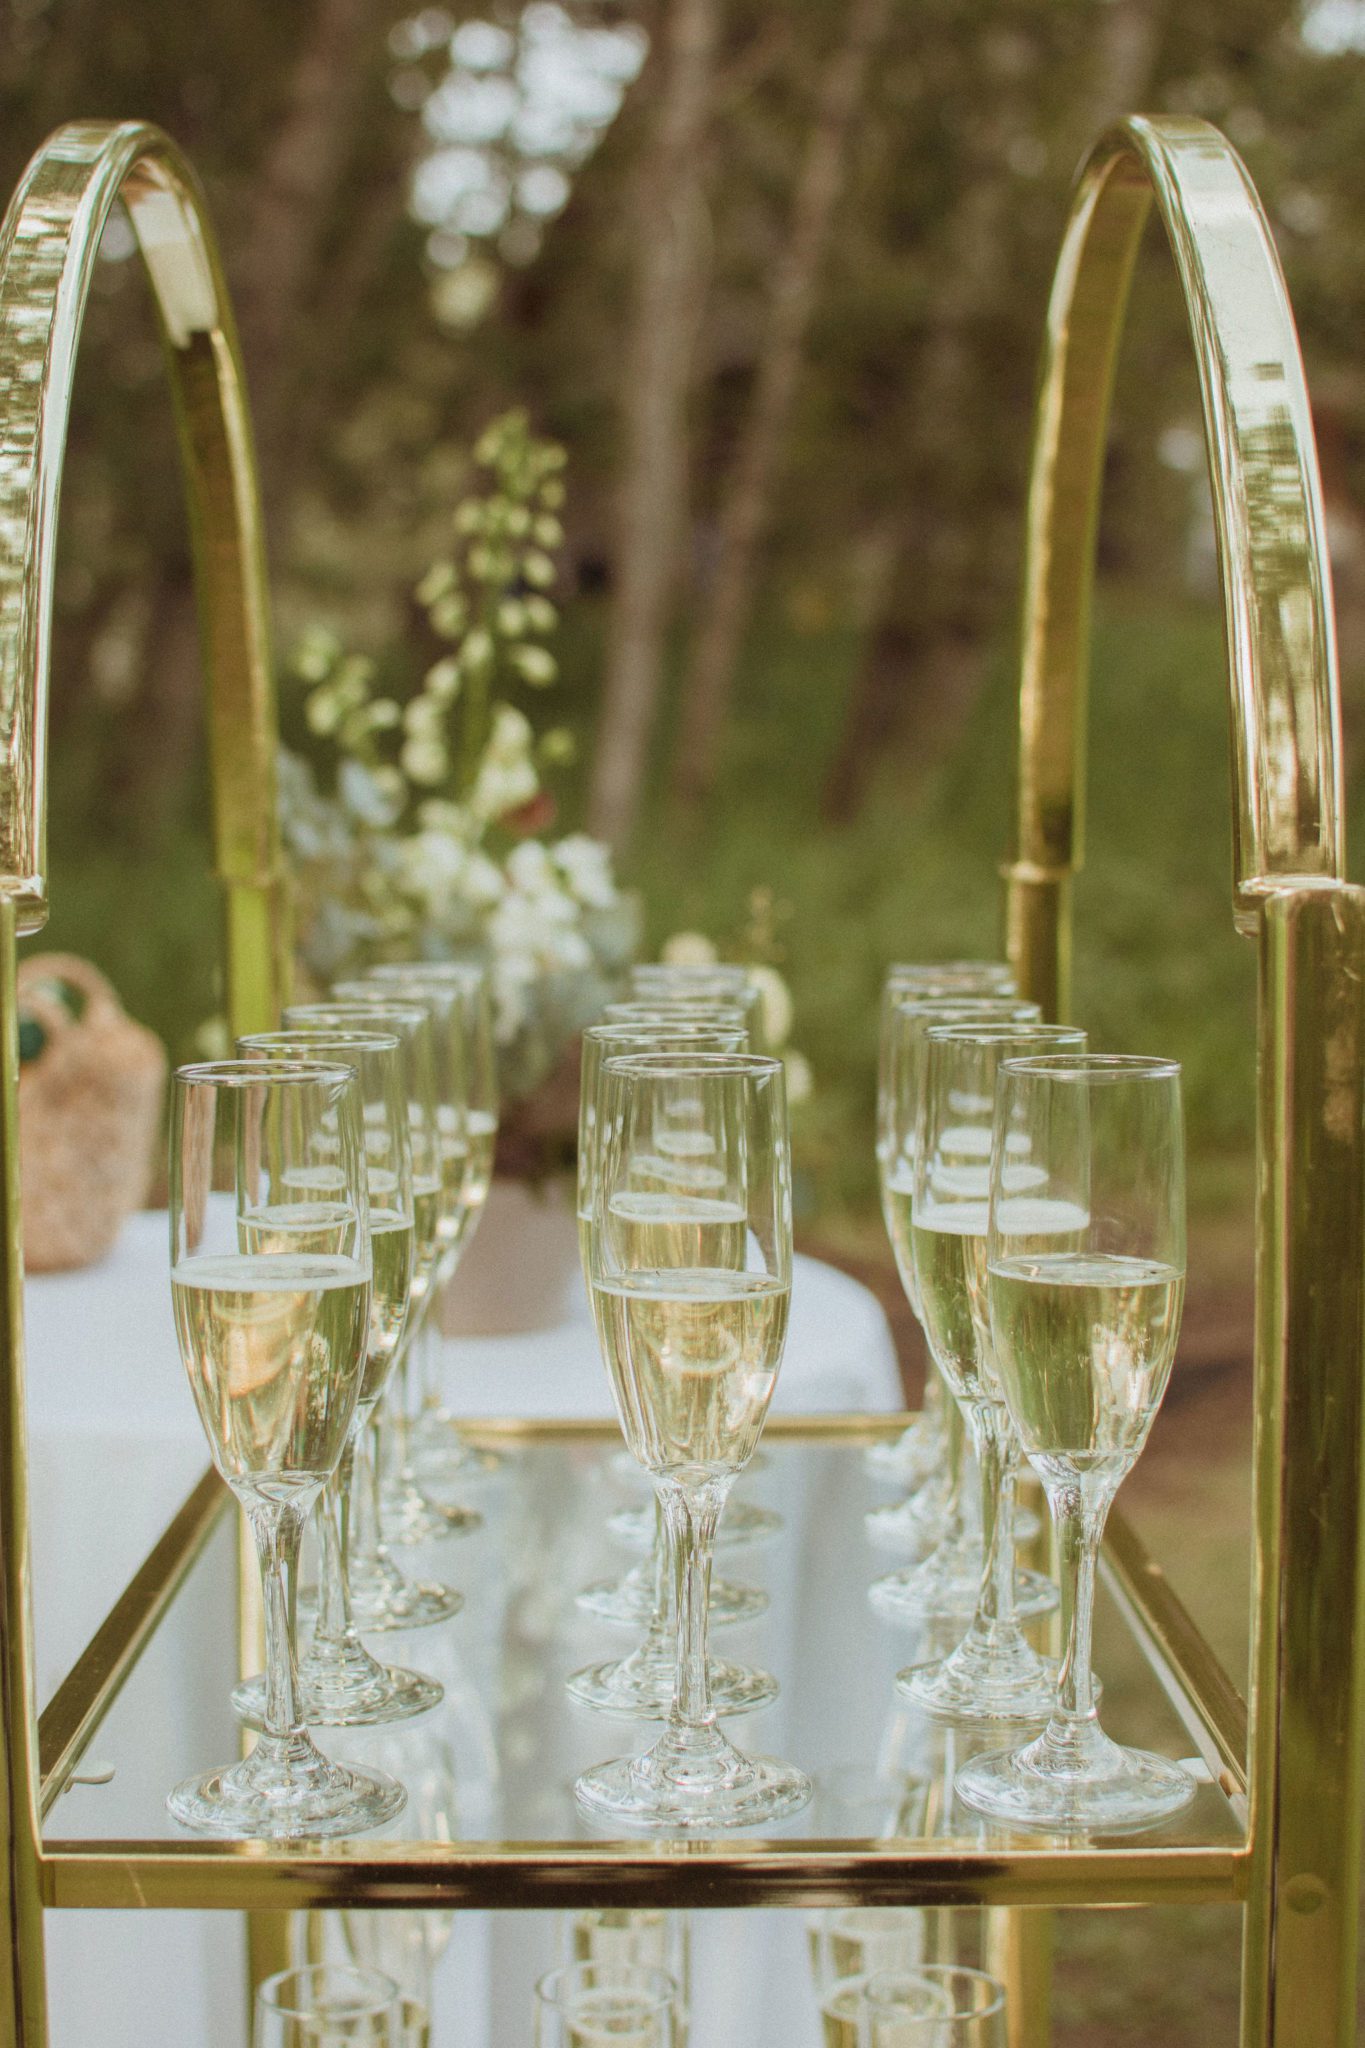 Champagne cart for outdoor summer wedding refreshment, Beverage ideas for wedding guests